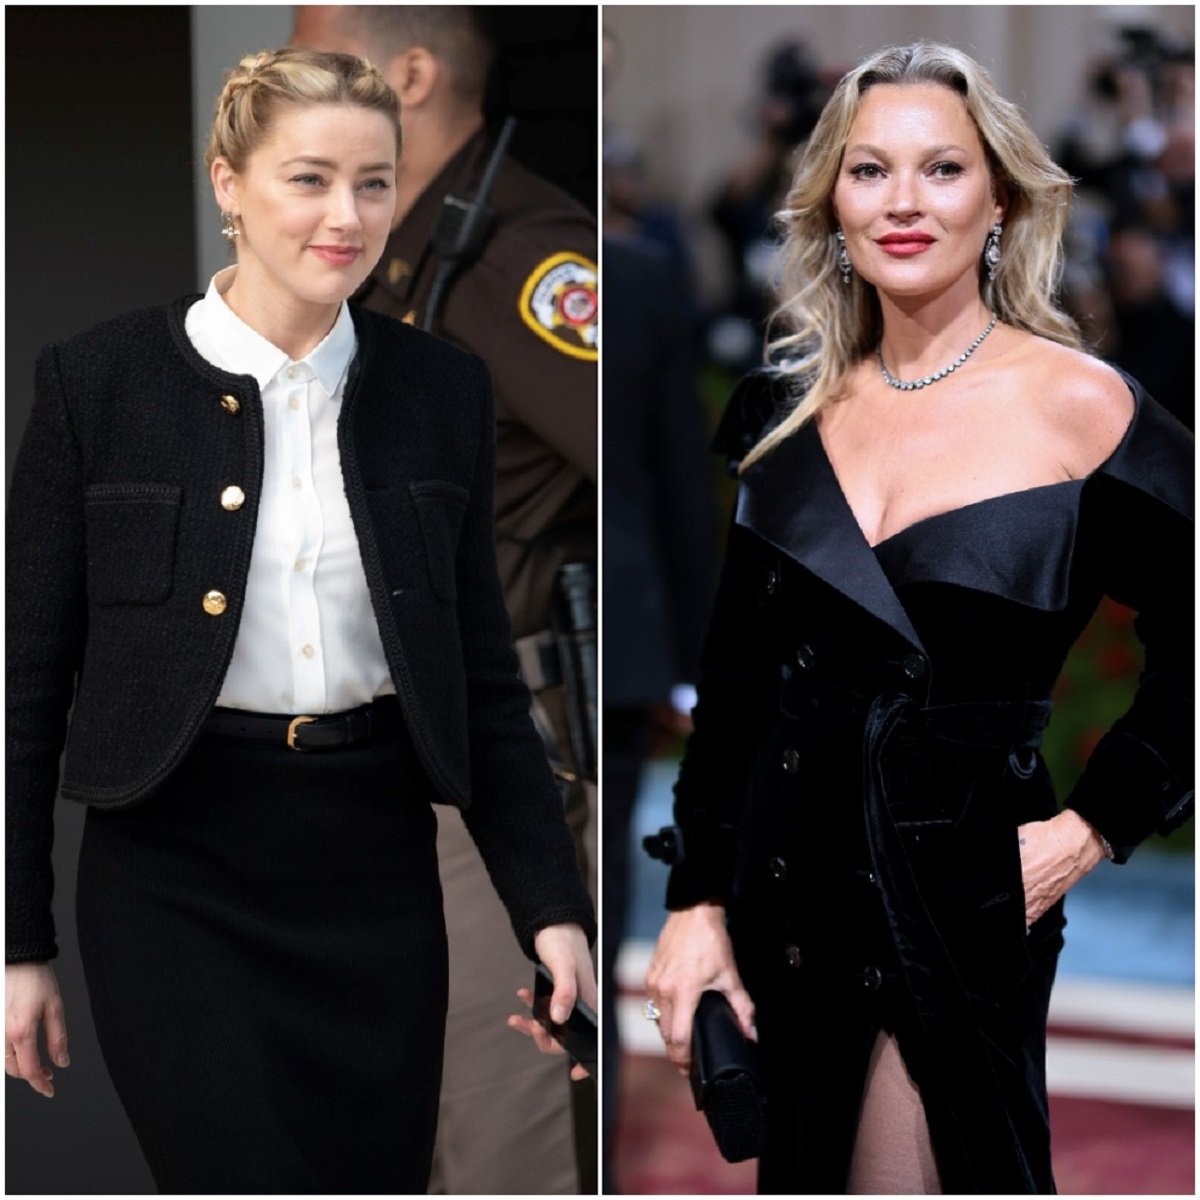 (L): Amber Heard, who earned a decent net worth for her films, leaving Fairfax County Virginia courtroom, (R): Kate Moss, who has earned a high net worth over her career, posing on the red carpet at the 2022 Met Gala